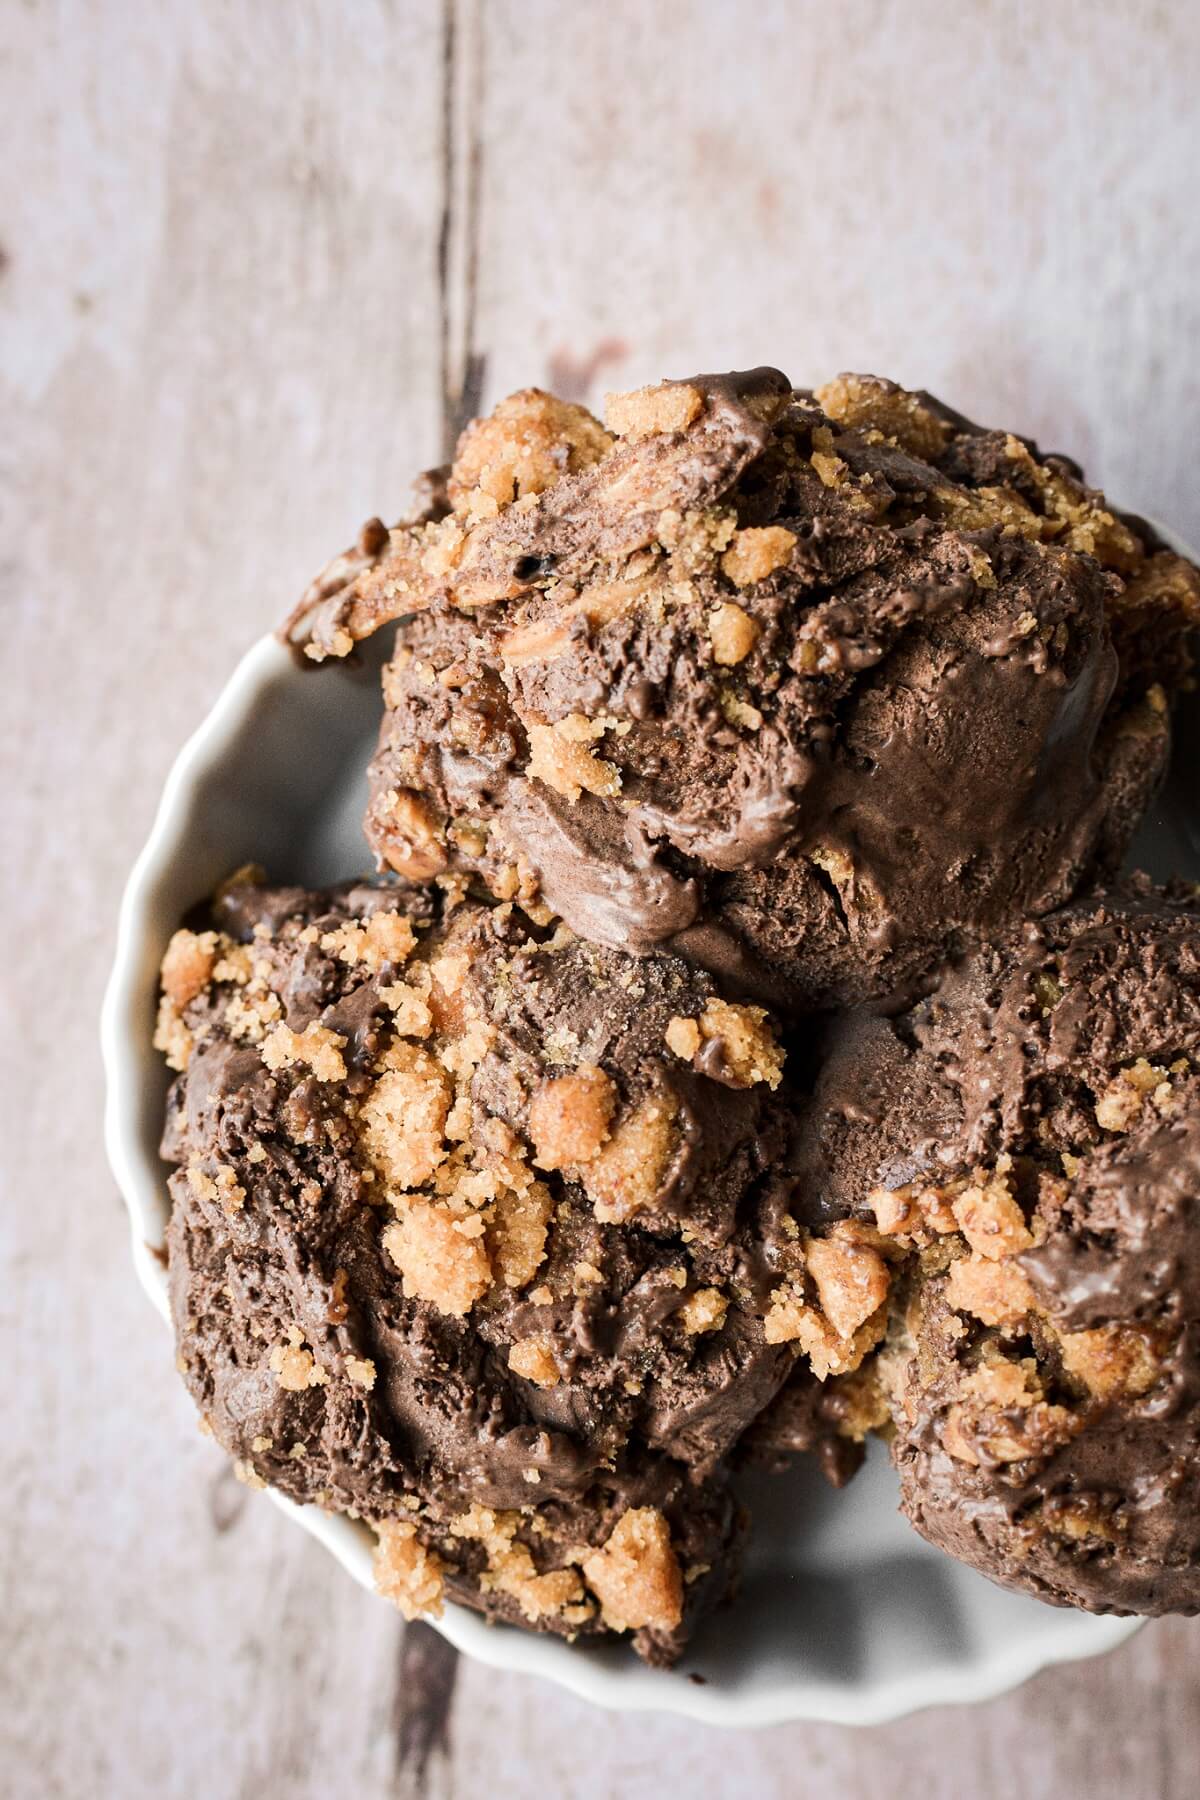 Three scoops of no churn chocolate peanut butter cookie ice cream.